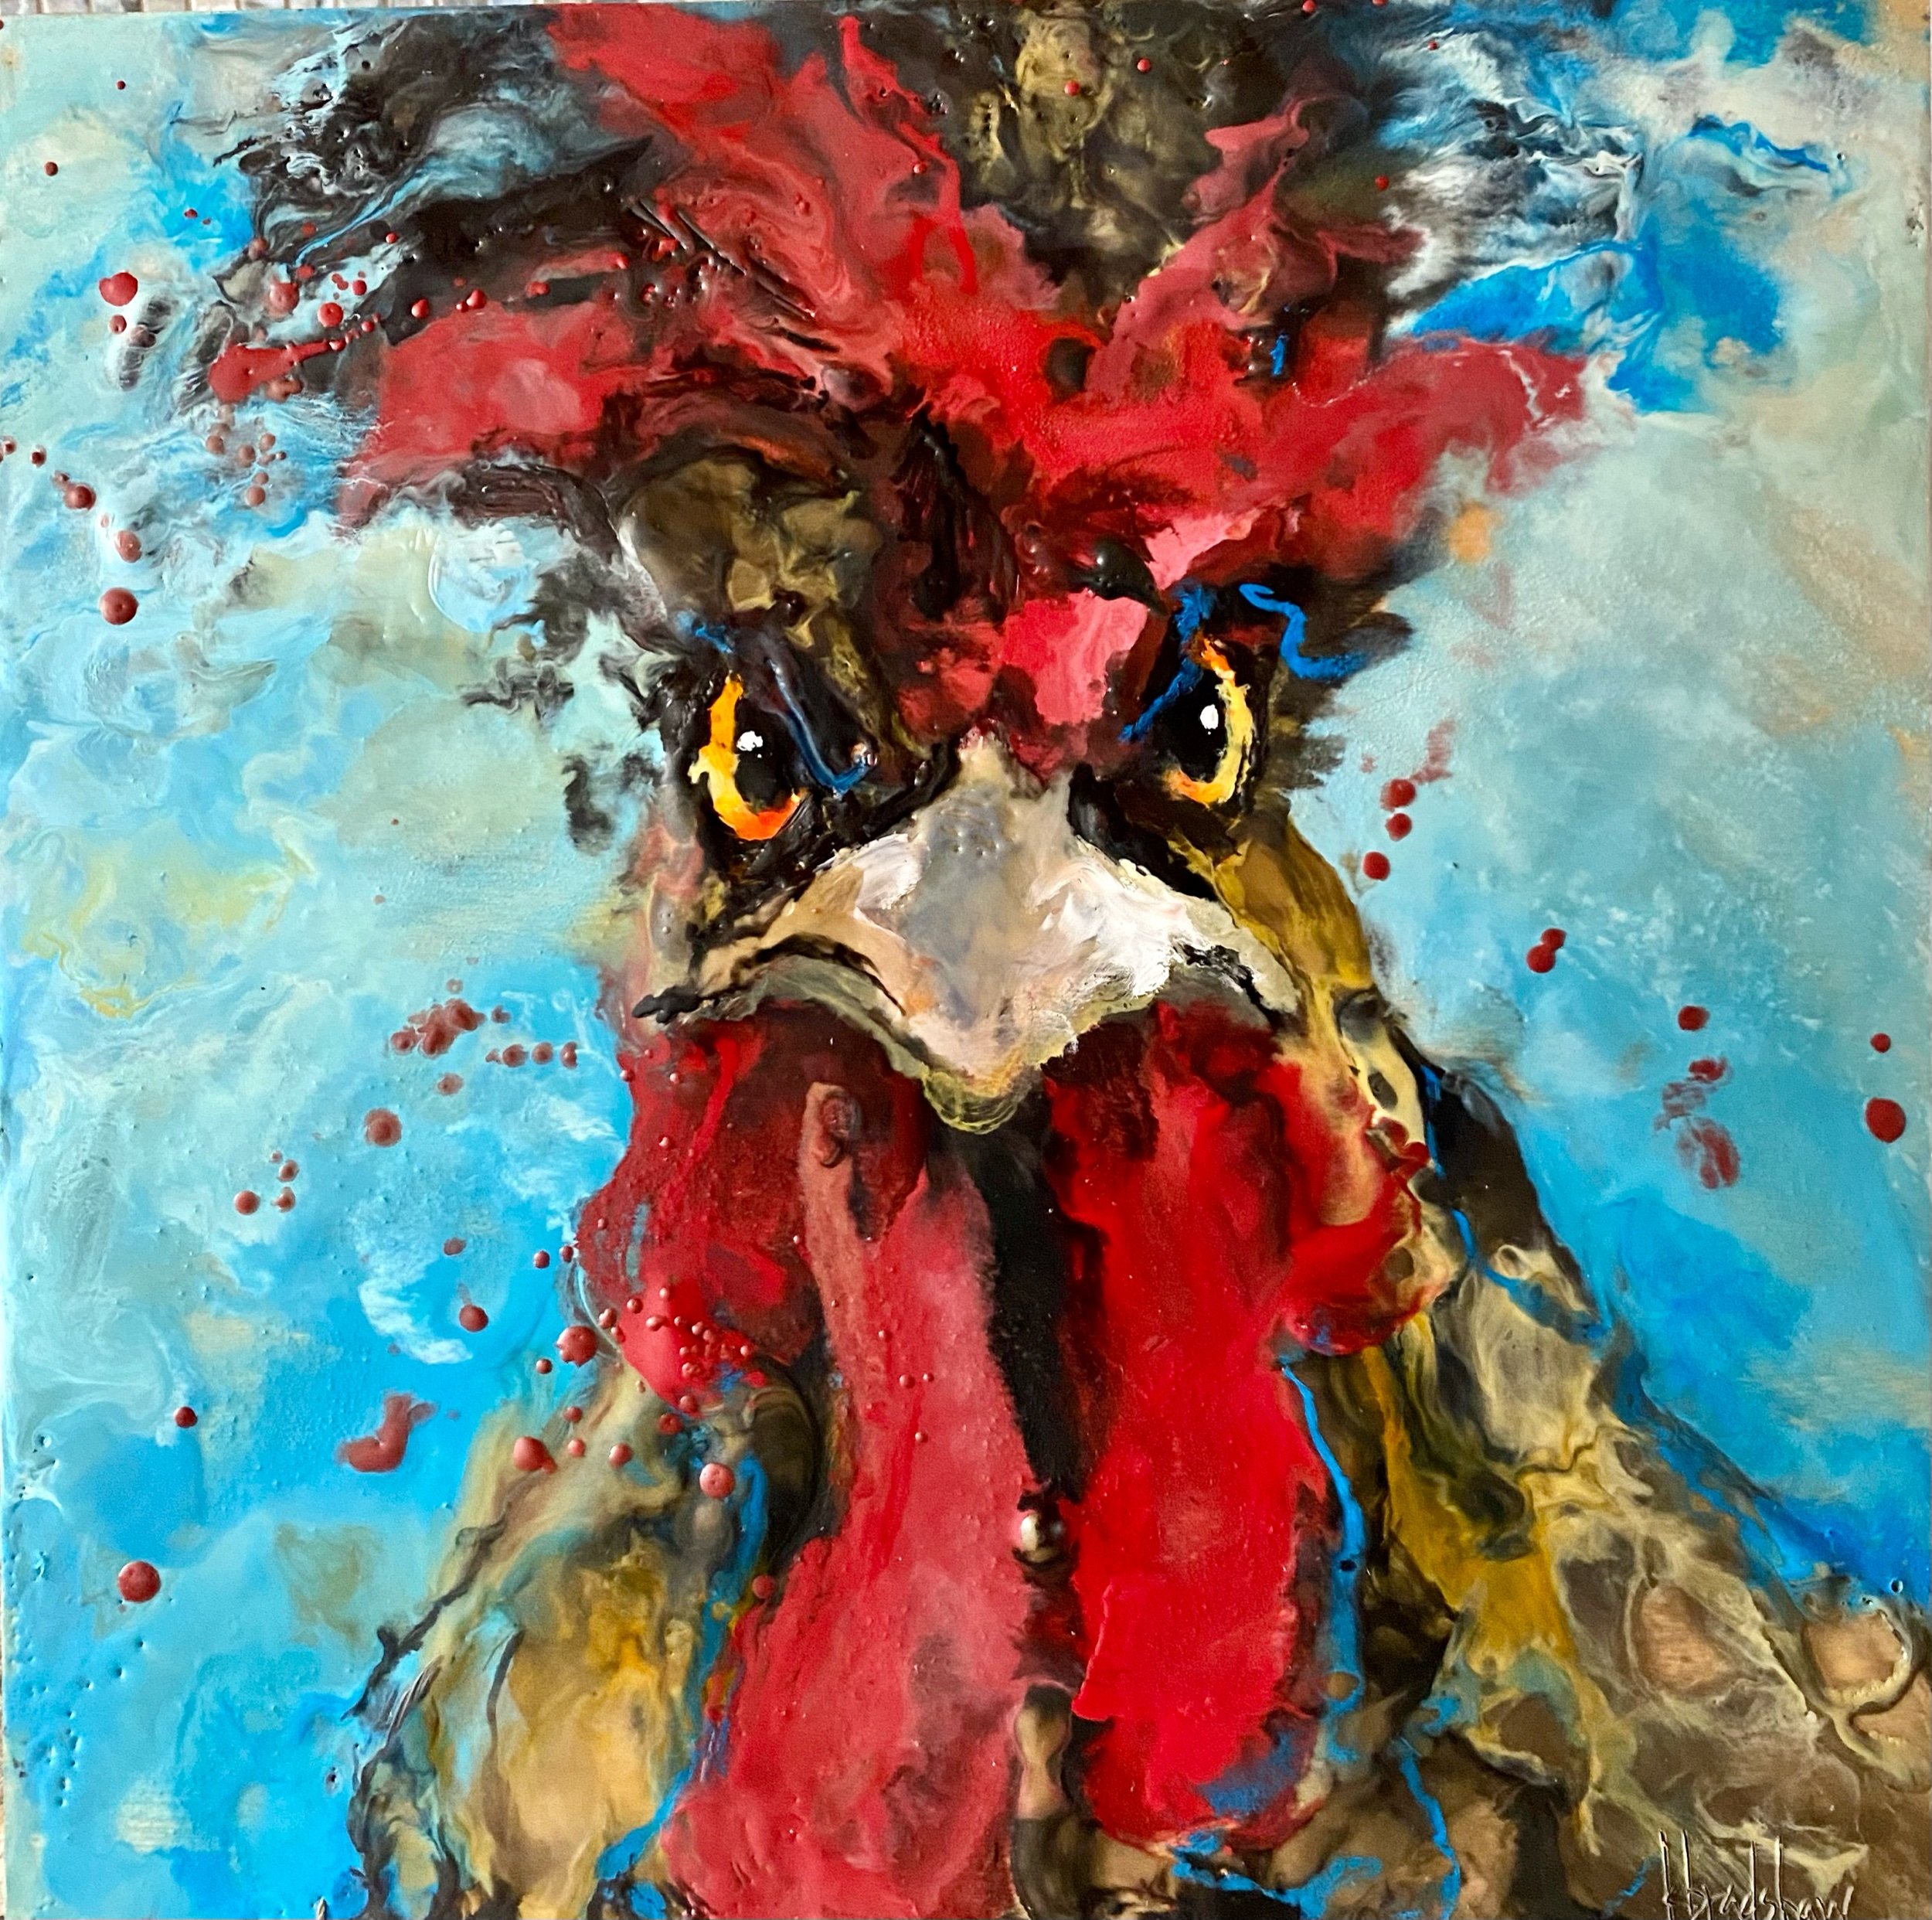 “Angry Rooster III”